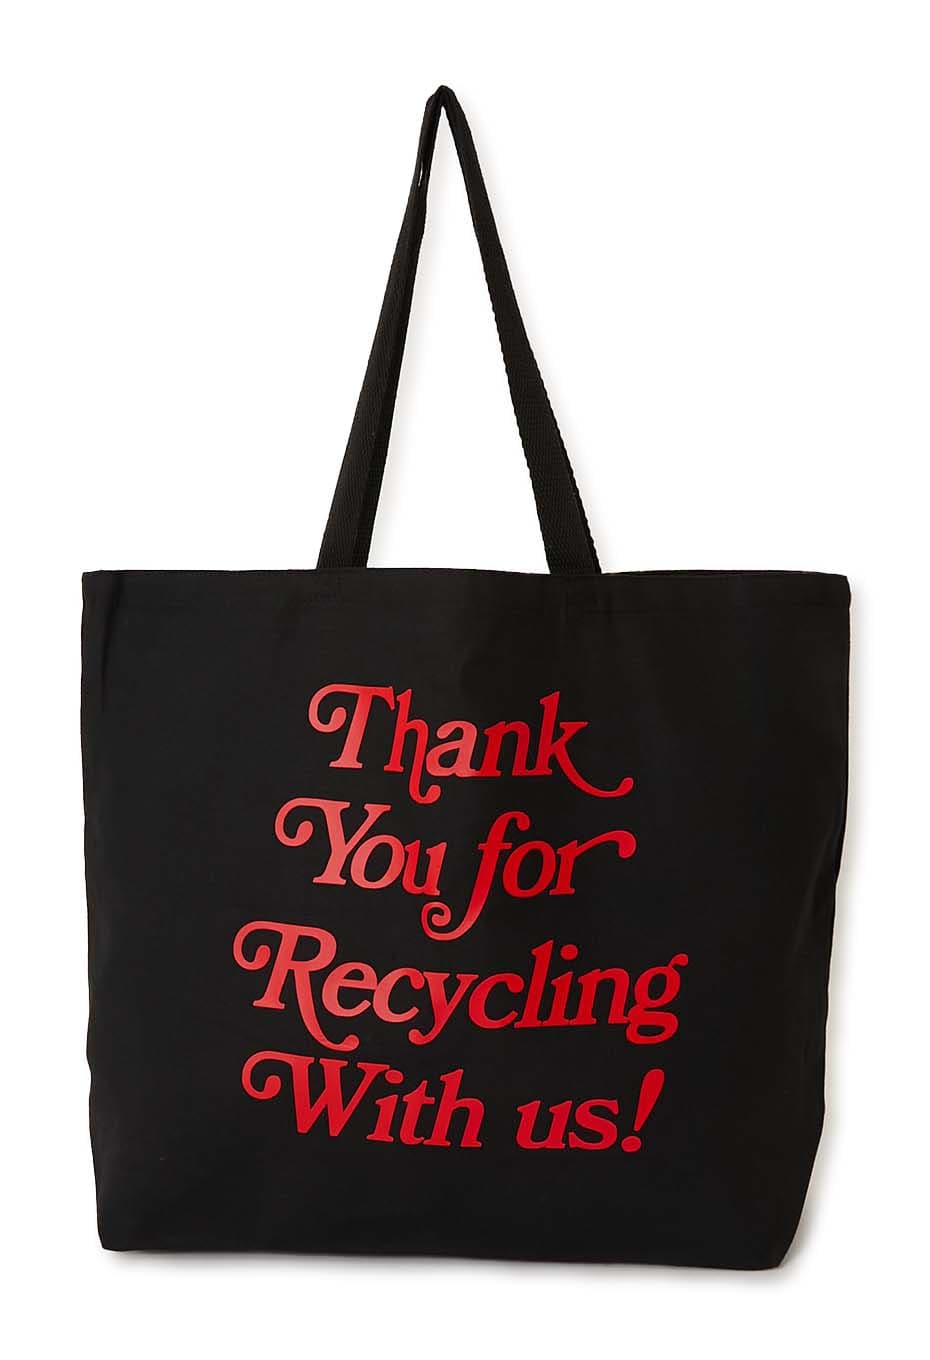 BAG SHOP NYC /THANK YOU FOR RECYCLING ジャンボトートバッグ